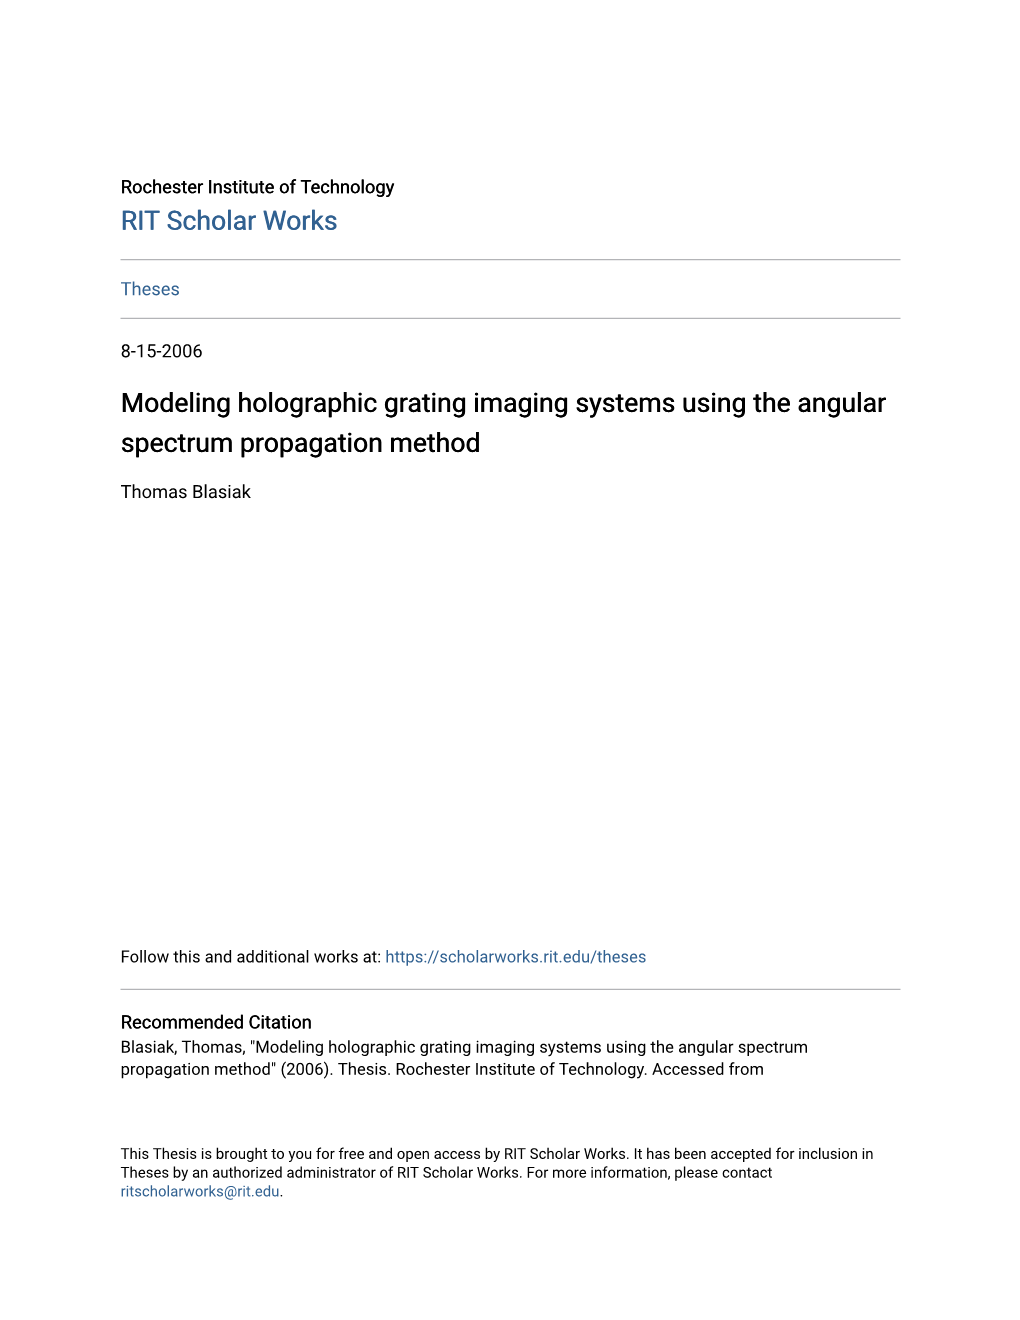 Modeling Holographic Grating Imaging Systems Using the Angular Spectrum Propagation Method